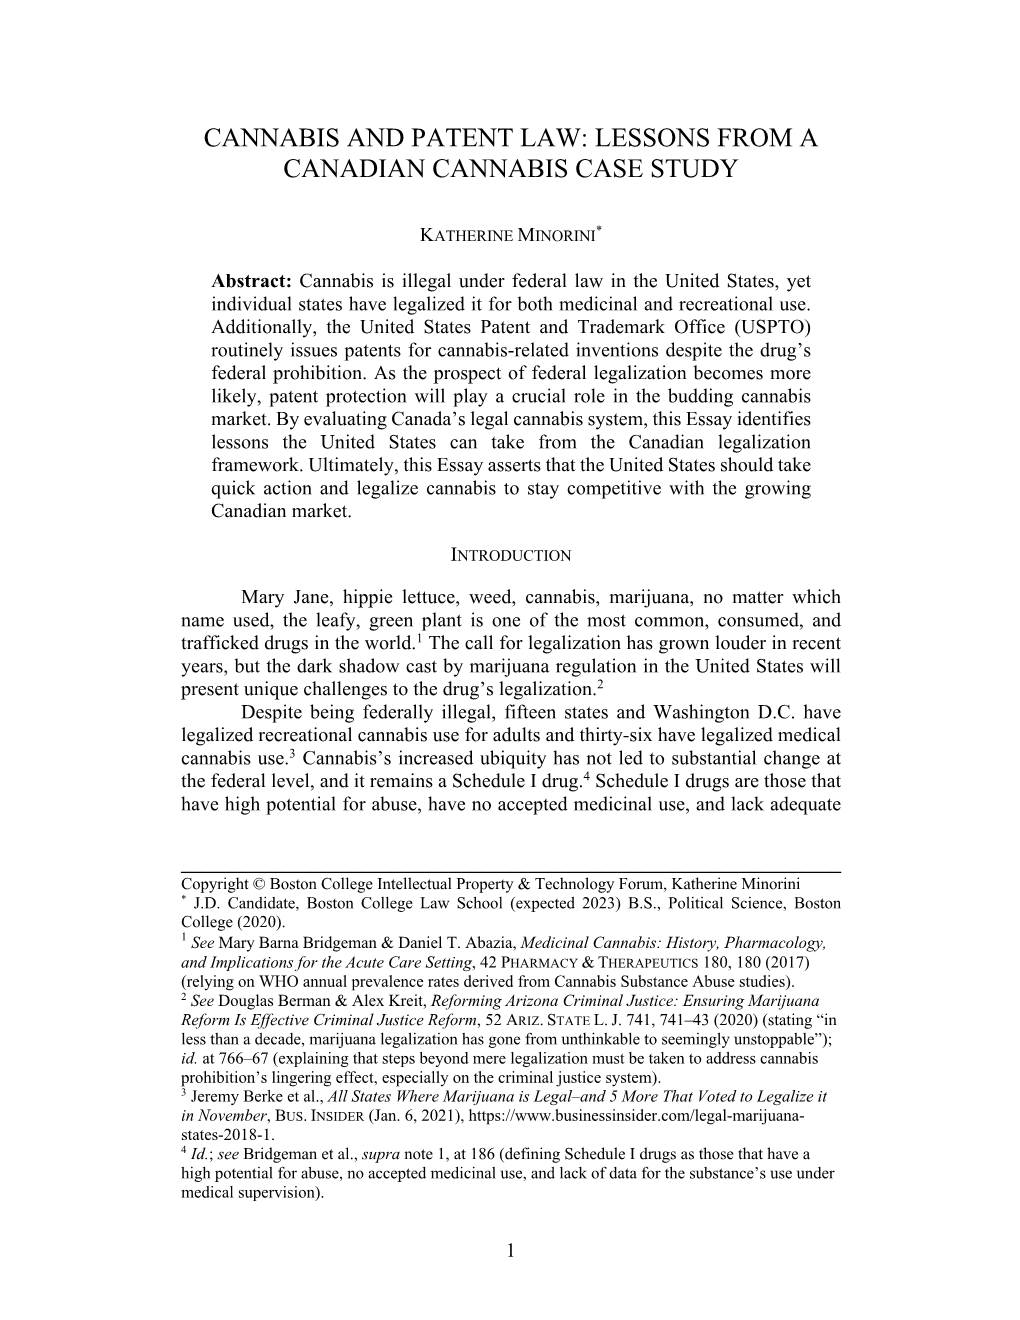 Cannabis and Patent Law: Lessons from a Canadian Cannabis Case Study